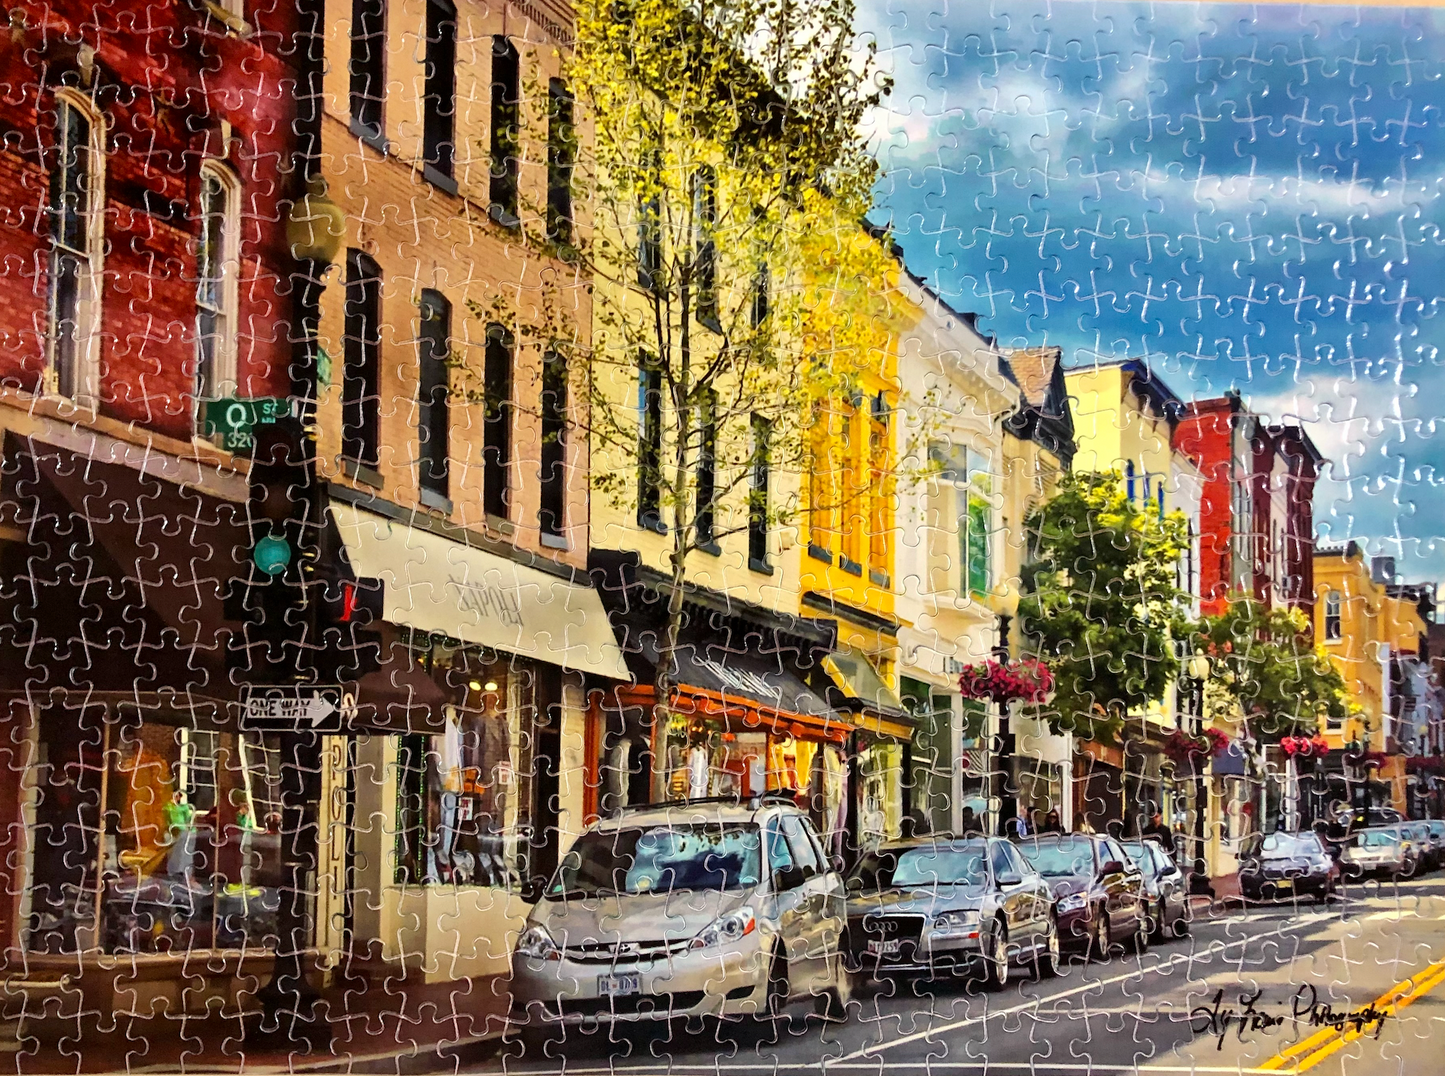 "Georgetown Shops" by Ty Lewis